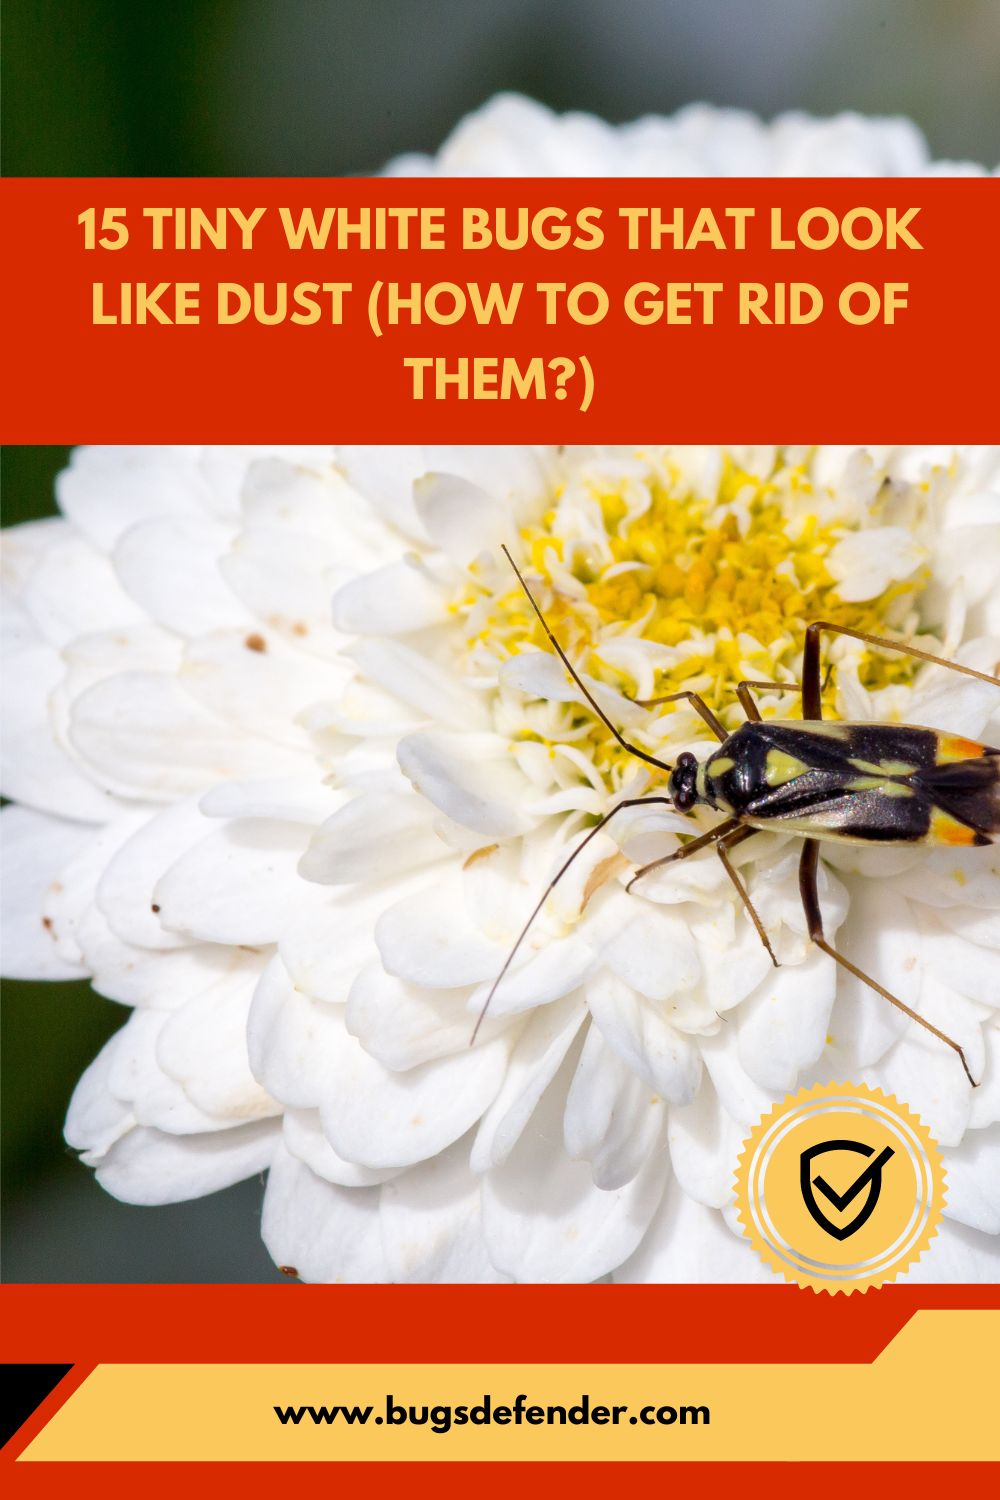 15 Tiny White Bugs that Look Like Dust (How to Get Rid of Them) pin1